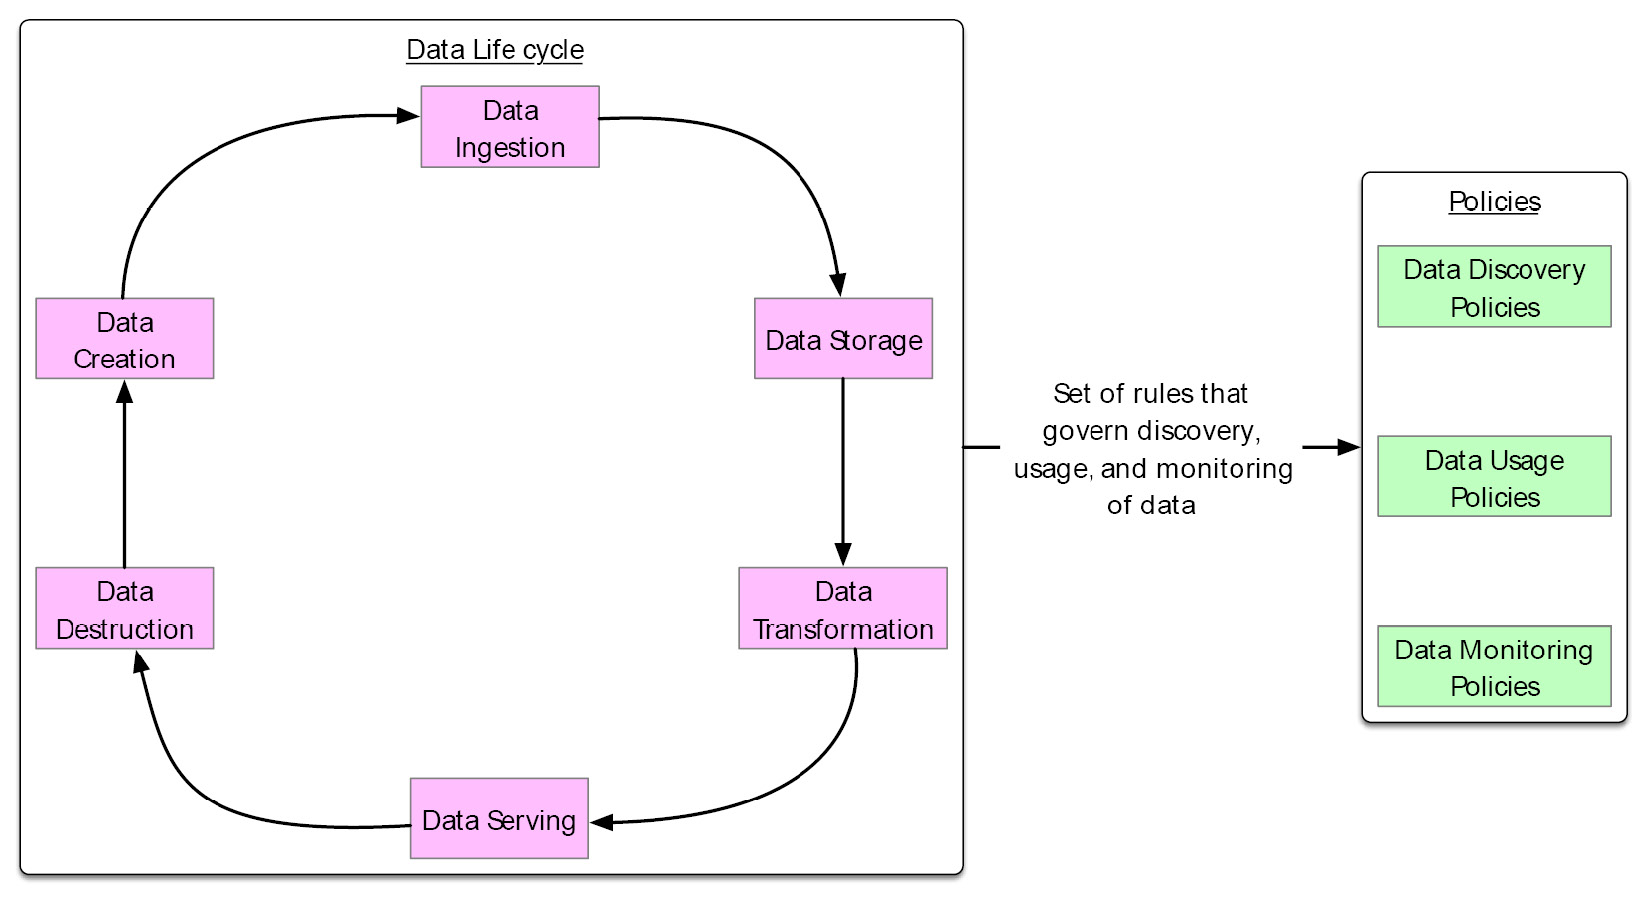 Figure 6.3 – Stages of the data life cycle and implementation of policies